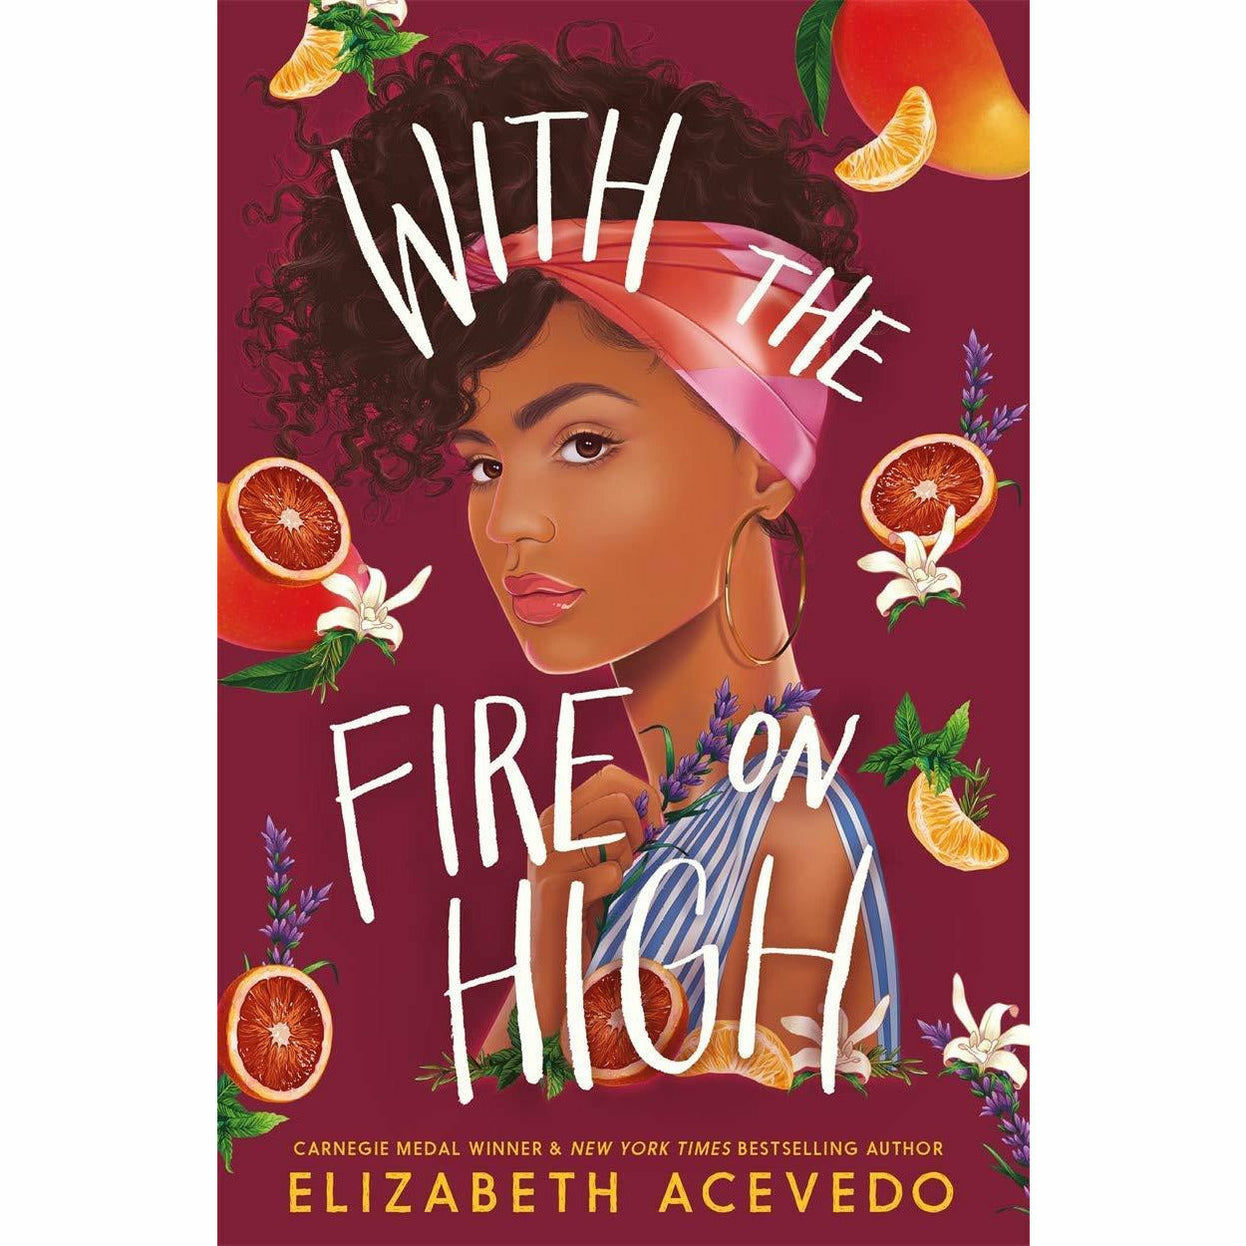 with the fire on high elizabeth acevedo